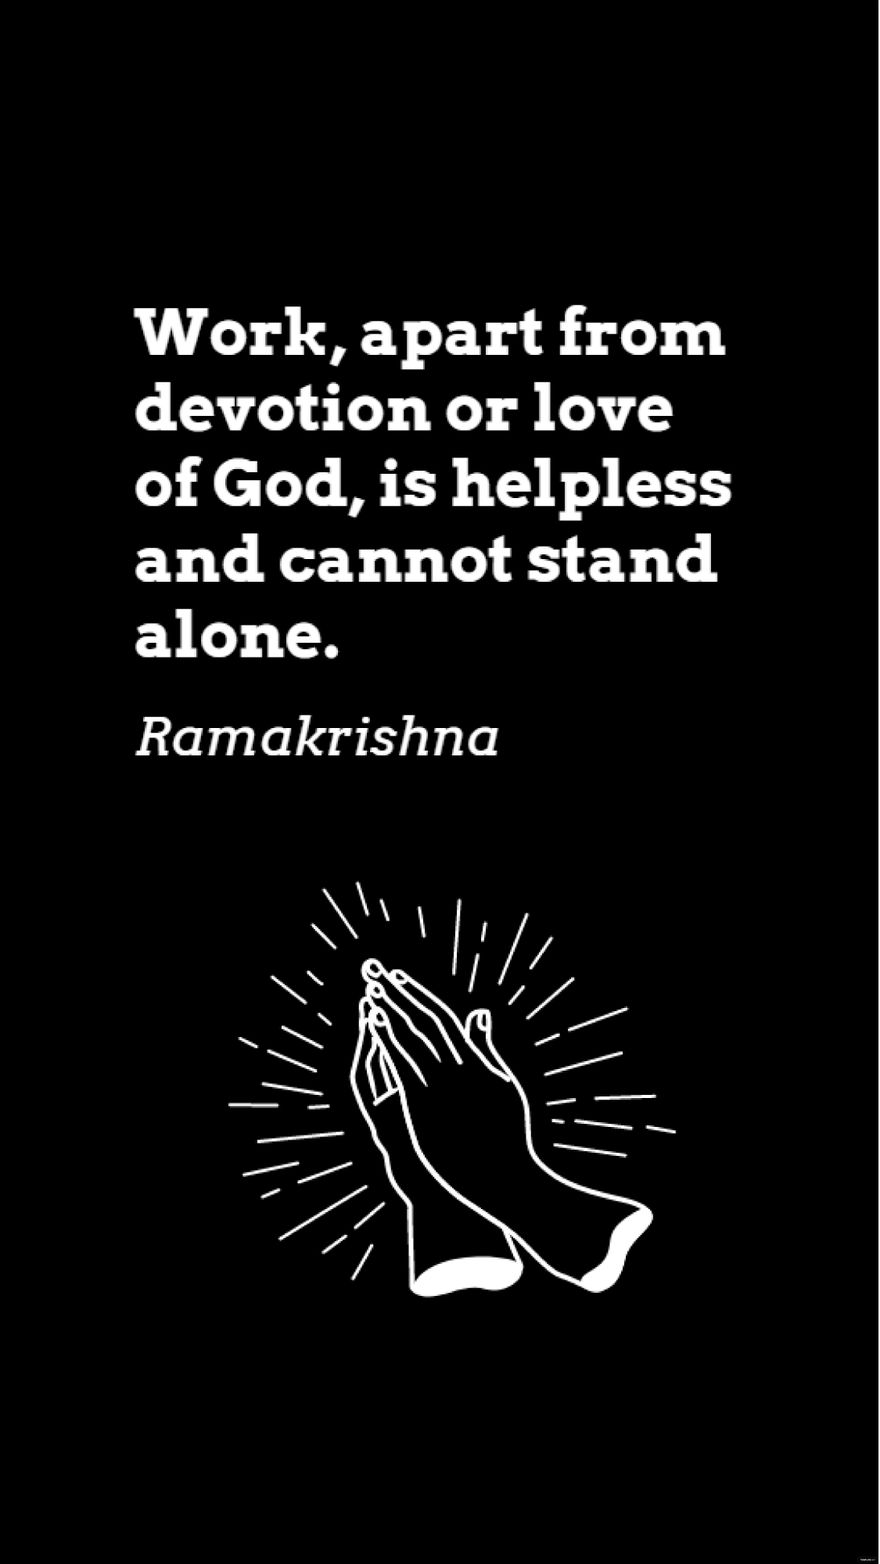 Free Ramakrishna - Work, apart from devotion or love of God, is helpless and cannot stand alone. in JPG